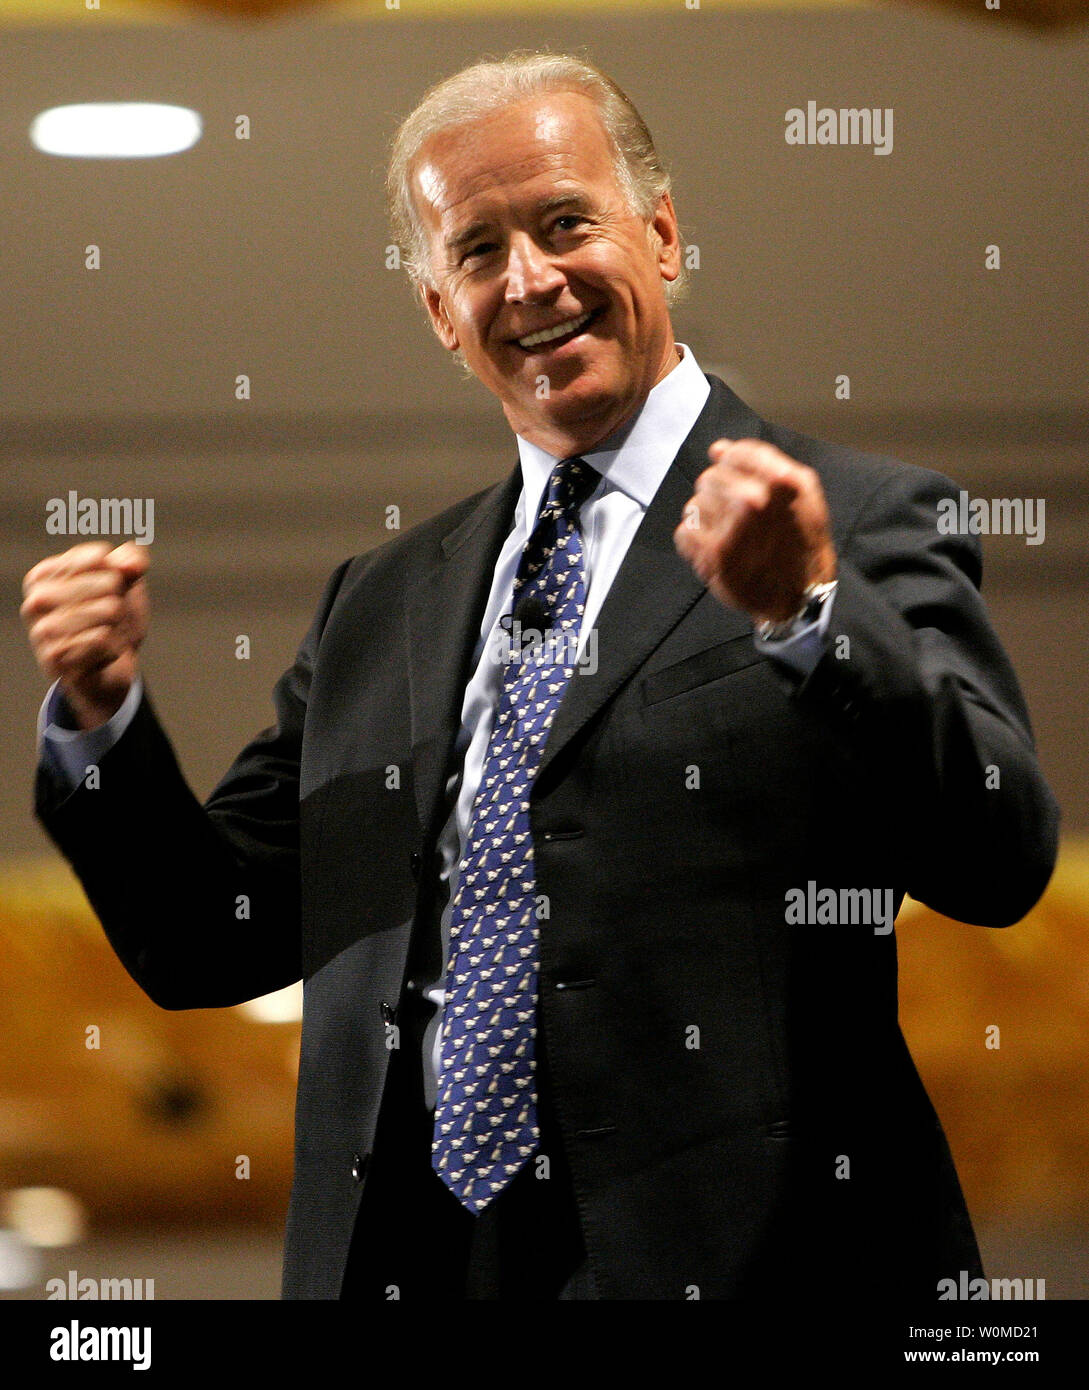 This July 15, 2007 file photo shows Sen. Joe Biden (D-DE) as he speaks during a forum of Democratic Presidential candidates hosted by the American Association for Justice at their 2007 Annual Convention in Chicago. Presumptive Democratic presidential candidate Barack Obama announced today that he has selected Biden as his running mate. (UPI Photo/Brian Kersey/File Photo) Stock Photo